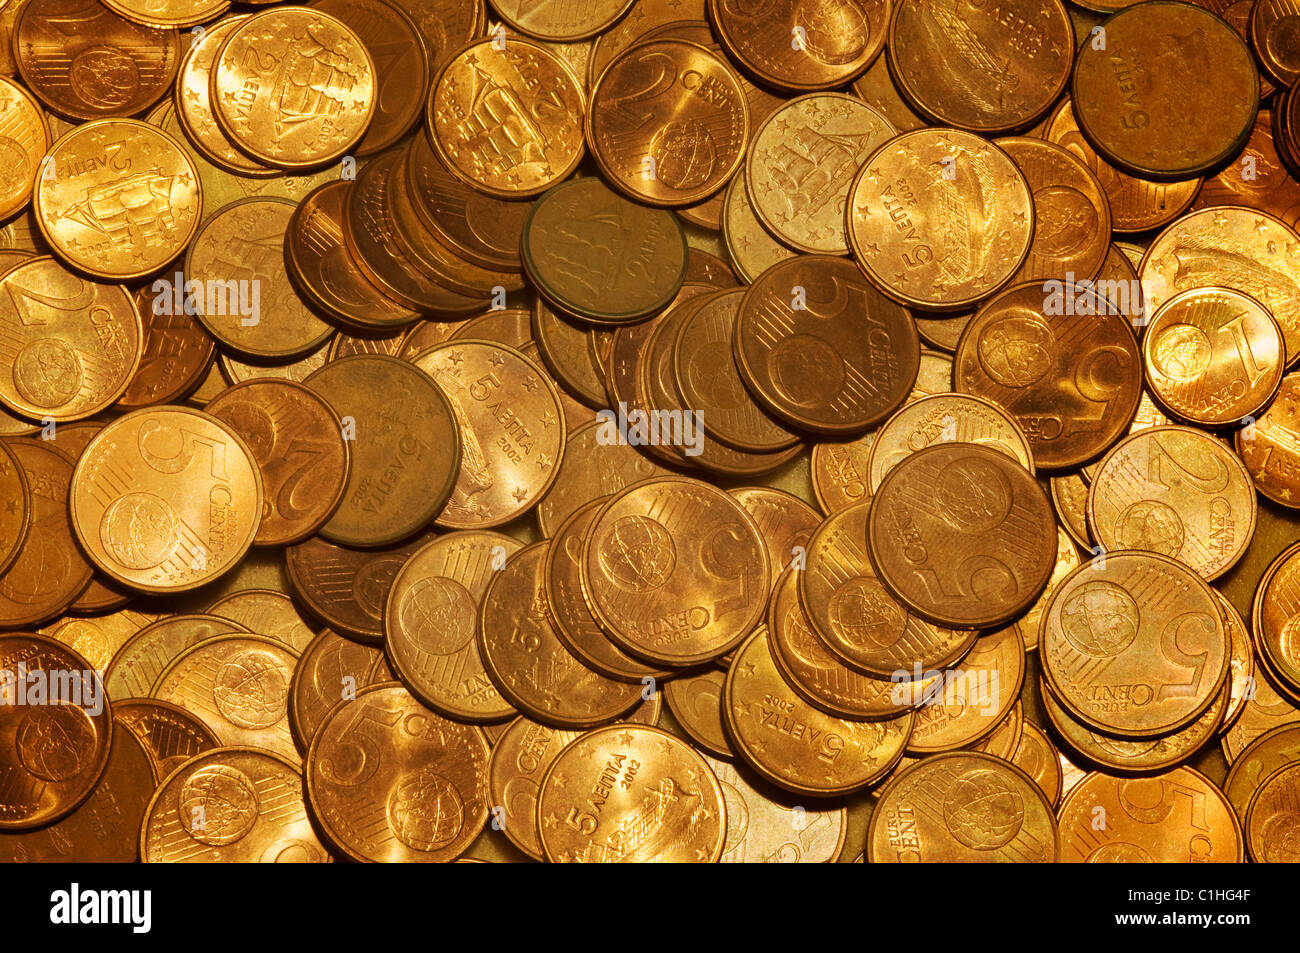 Image shows a pattern of euro cent coins Stock Photo